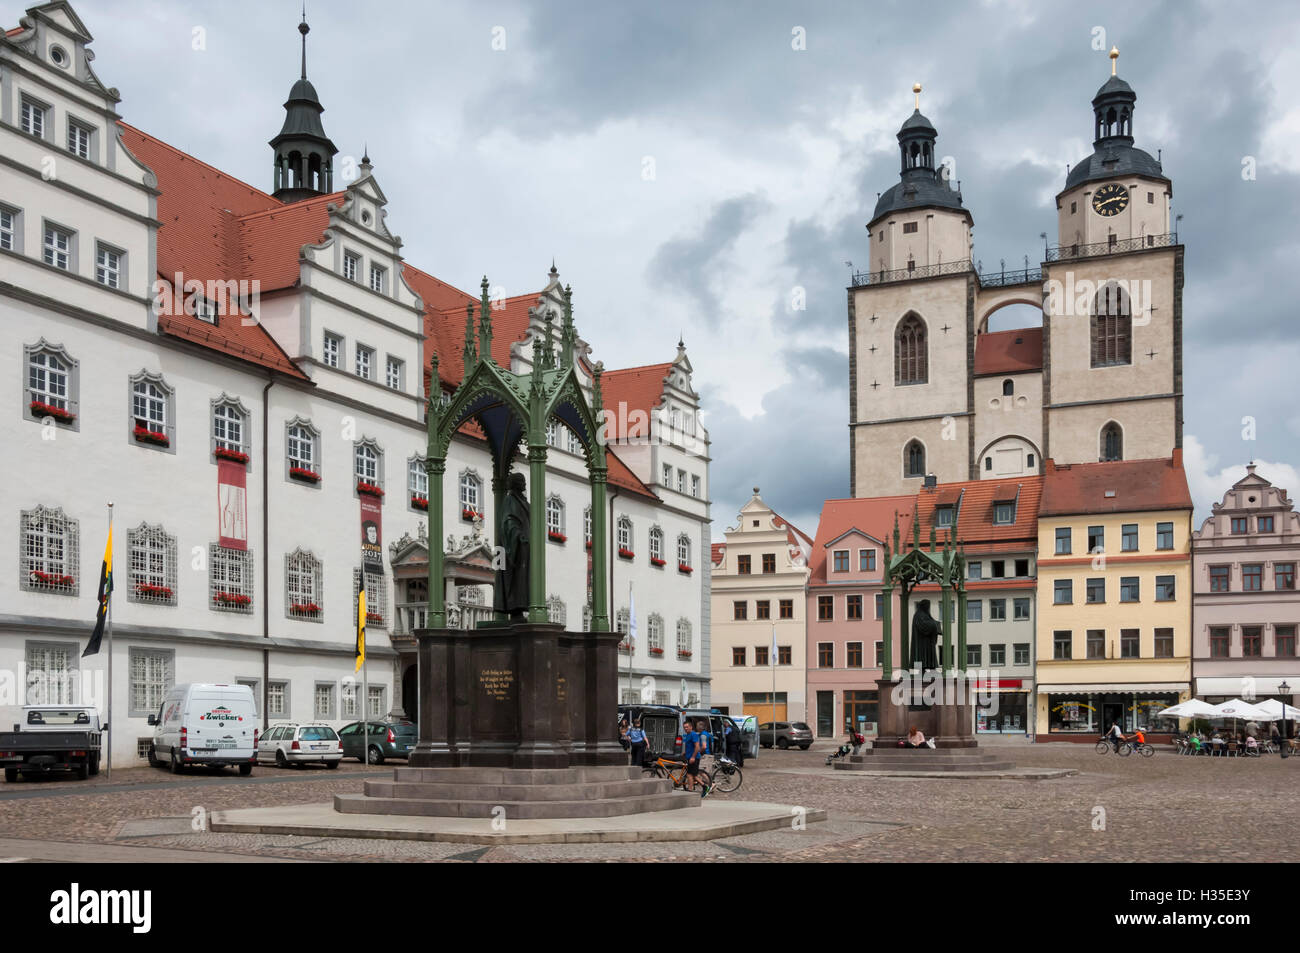 Town Square with Stadtkirke and Town Hall, Staue of Martin Luther, Lutherstadt Wittenberg, Saxony-Anhalt, Germany Stock Photo